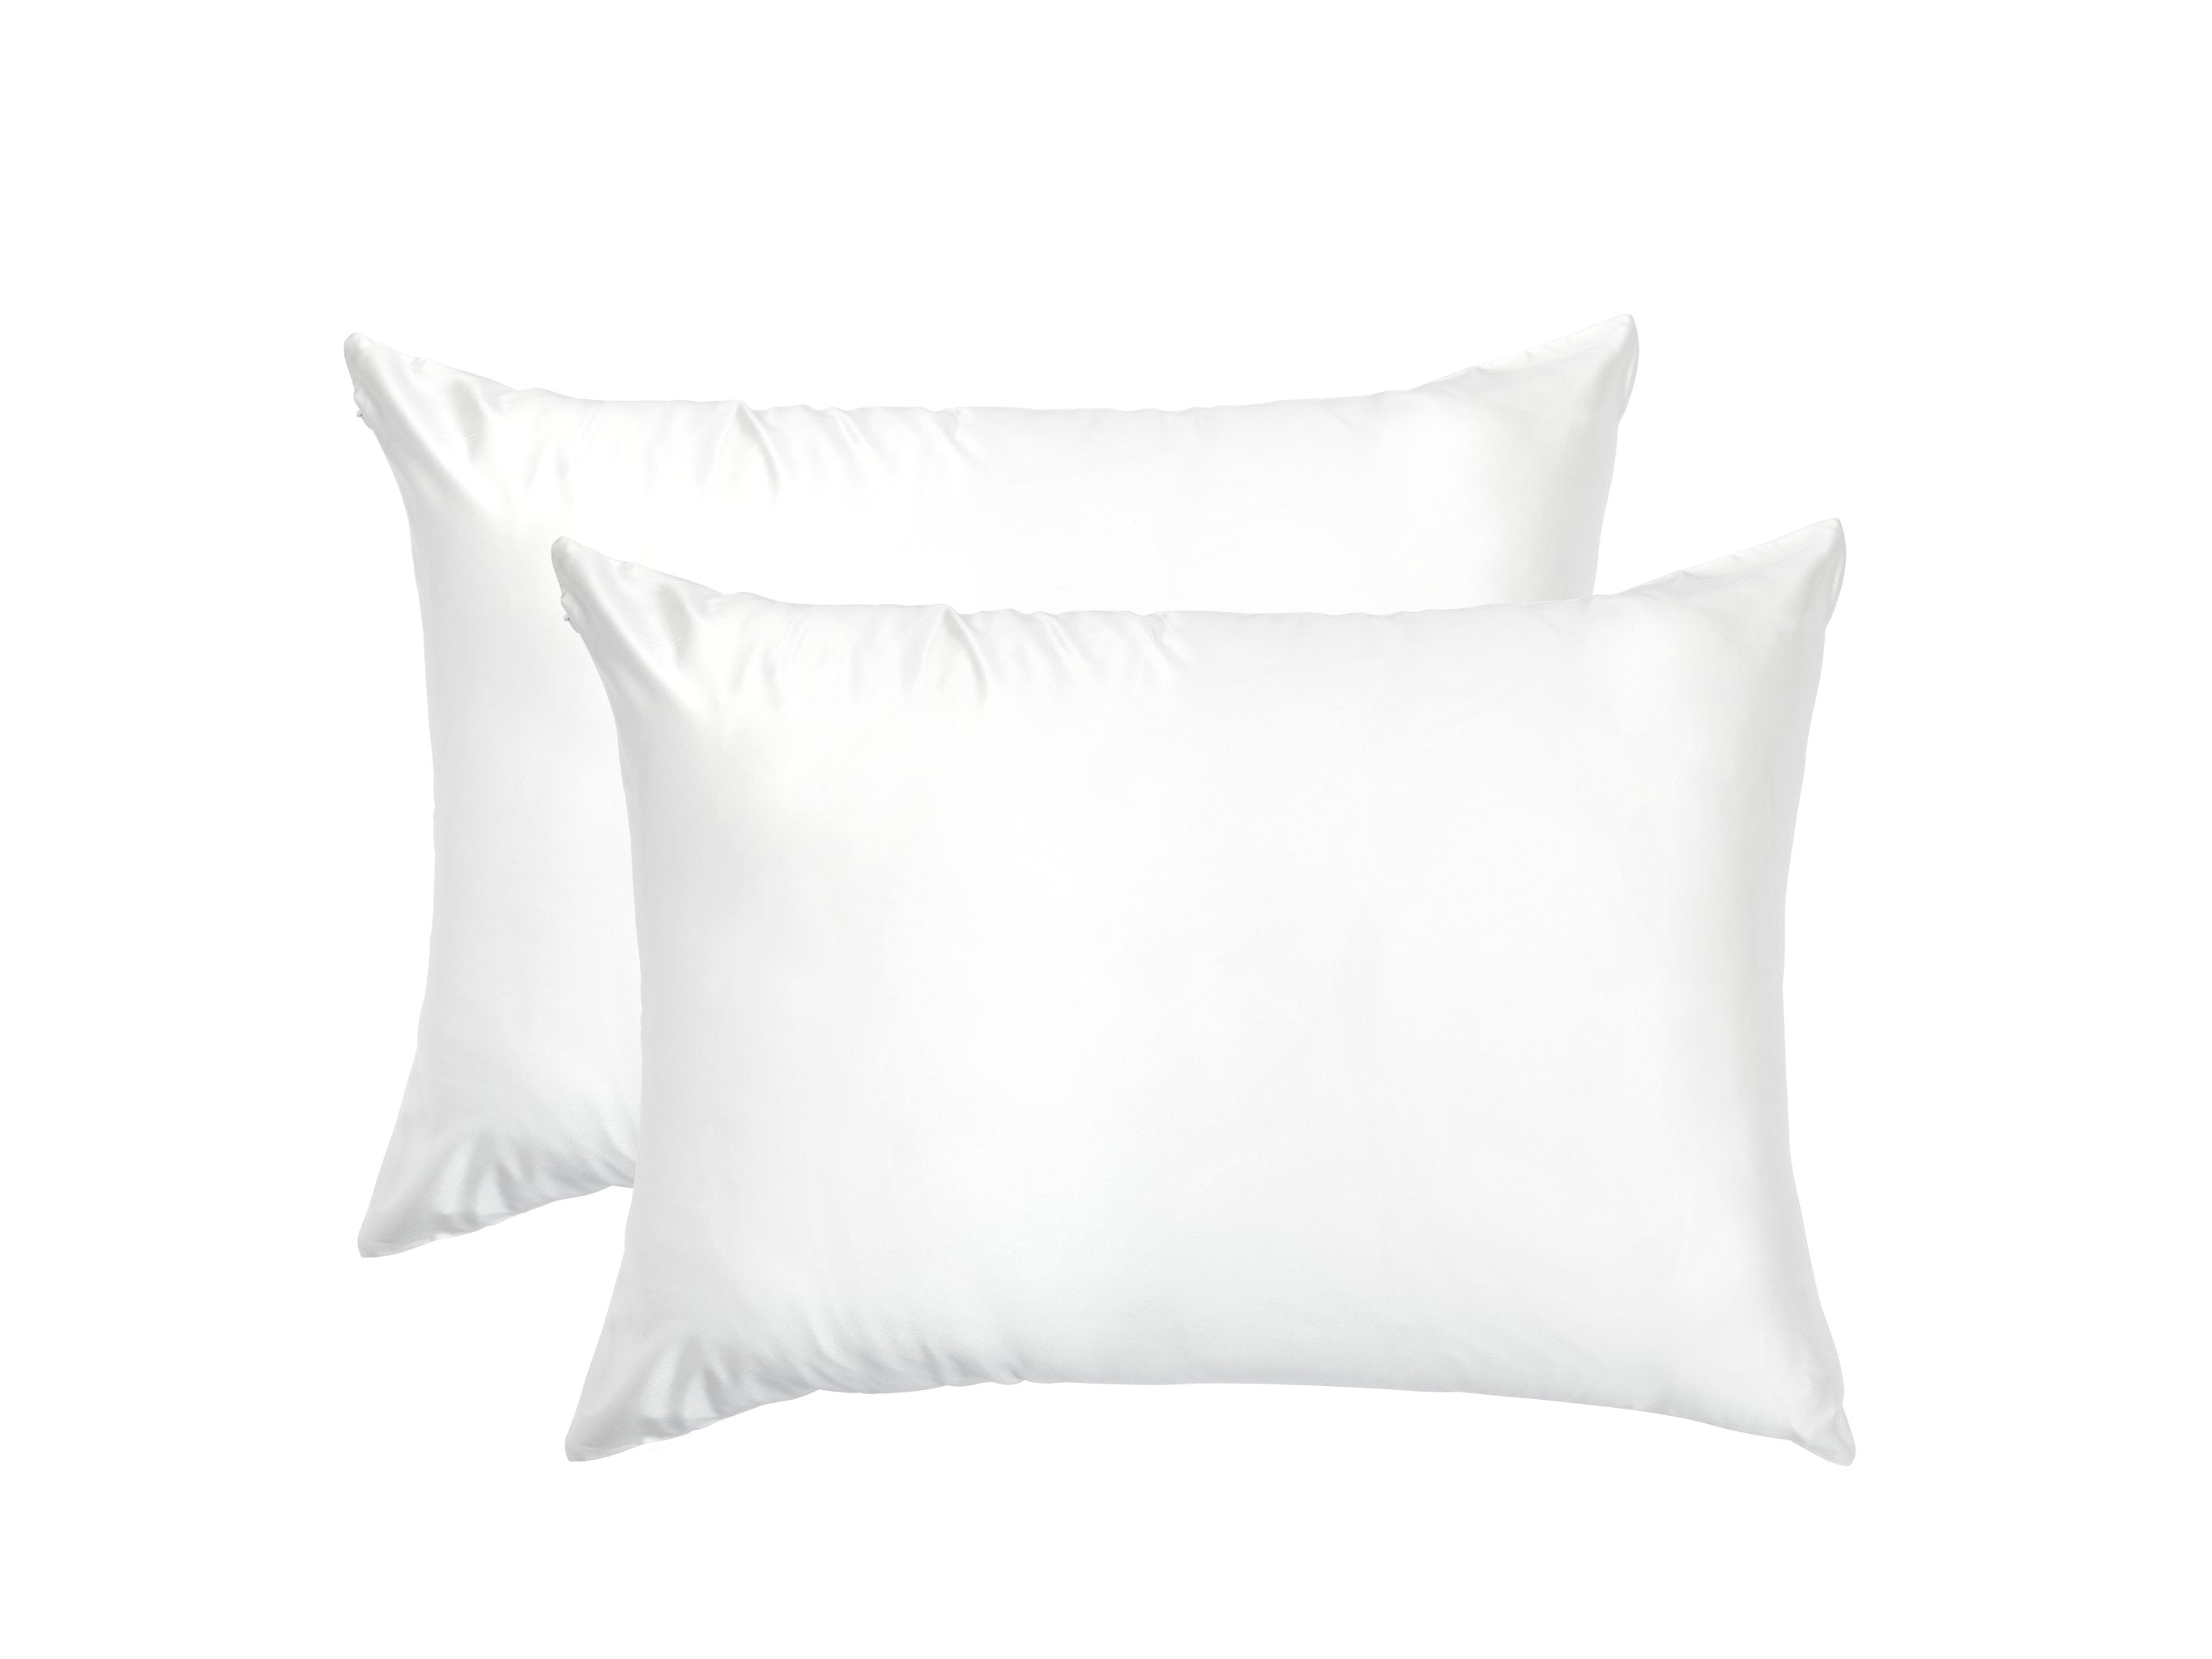 Twin Set Pearl White 100% Pure Mulberry Silk Pillowcase Infused with Hyaluronic Acid and Argan Oil - Lunalux